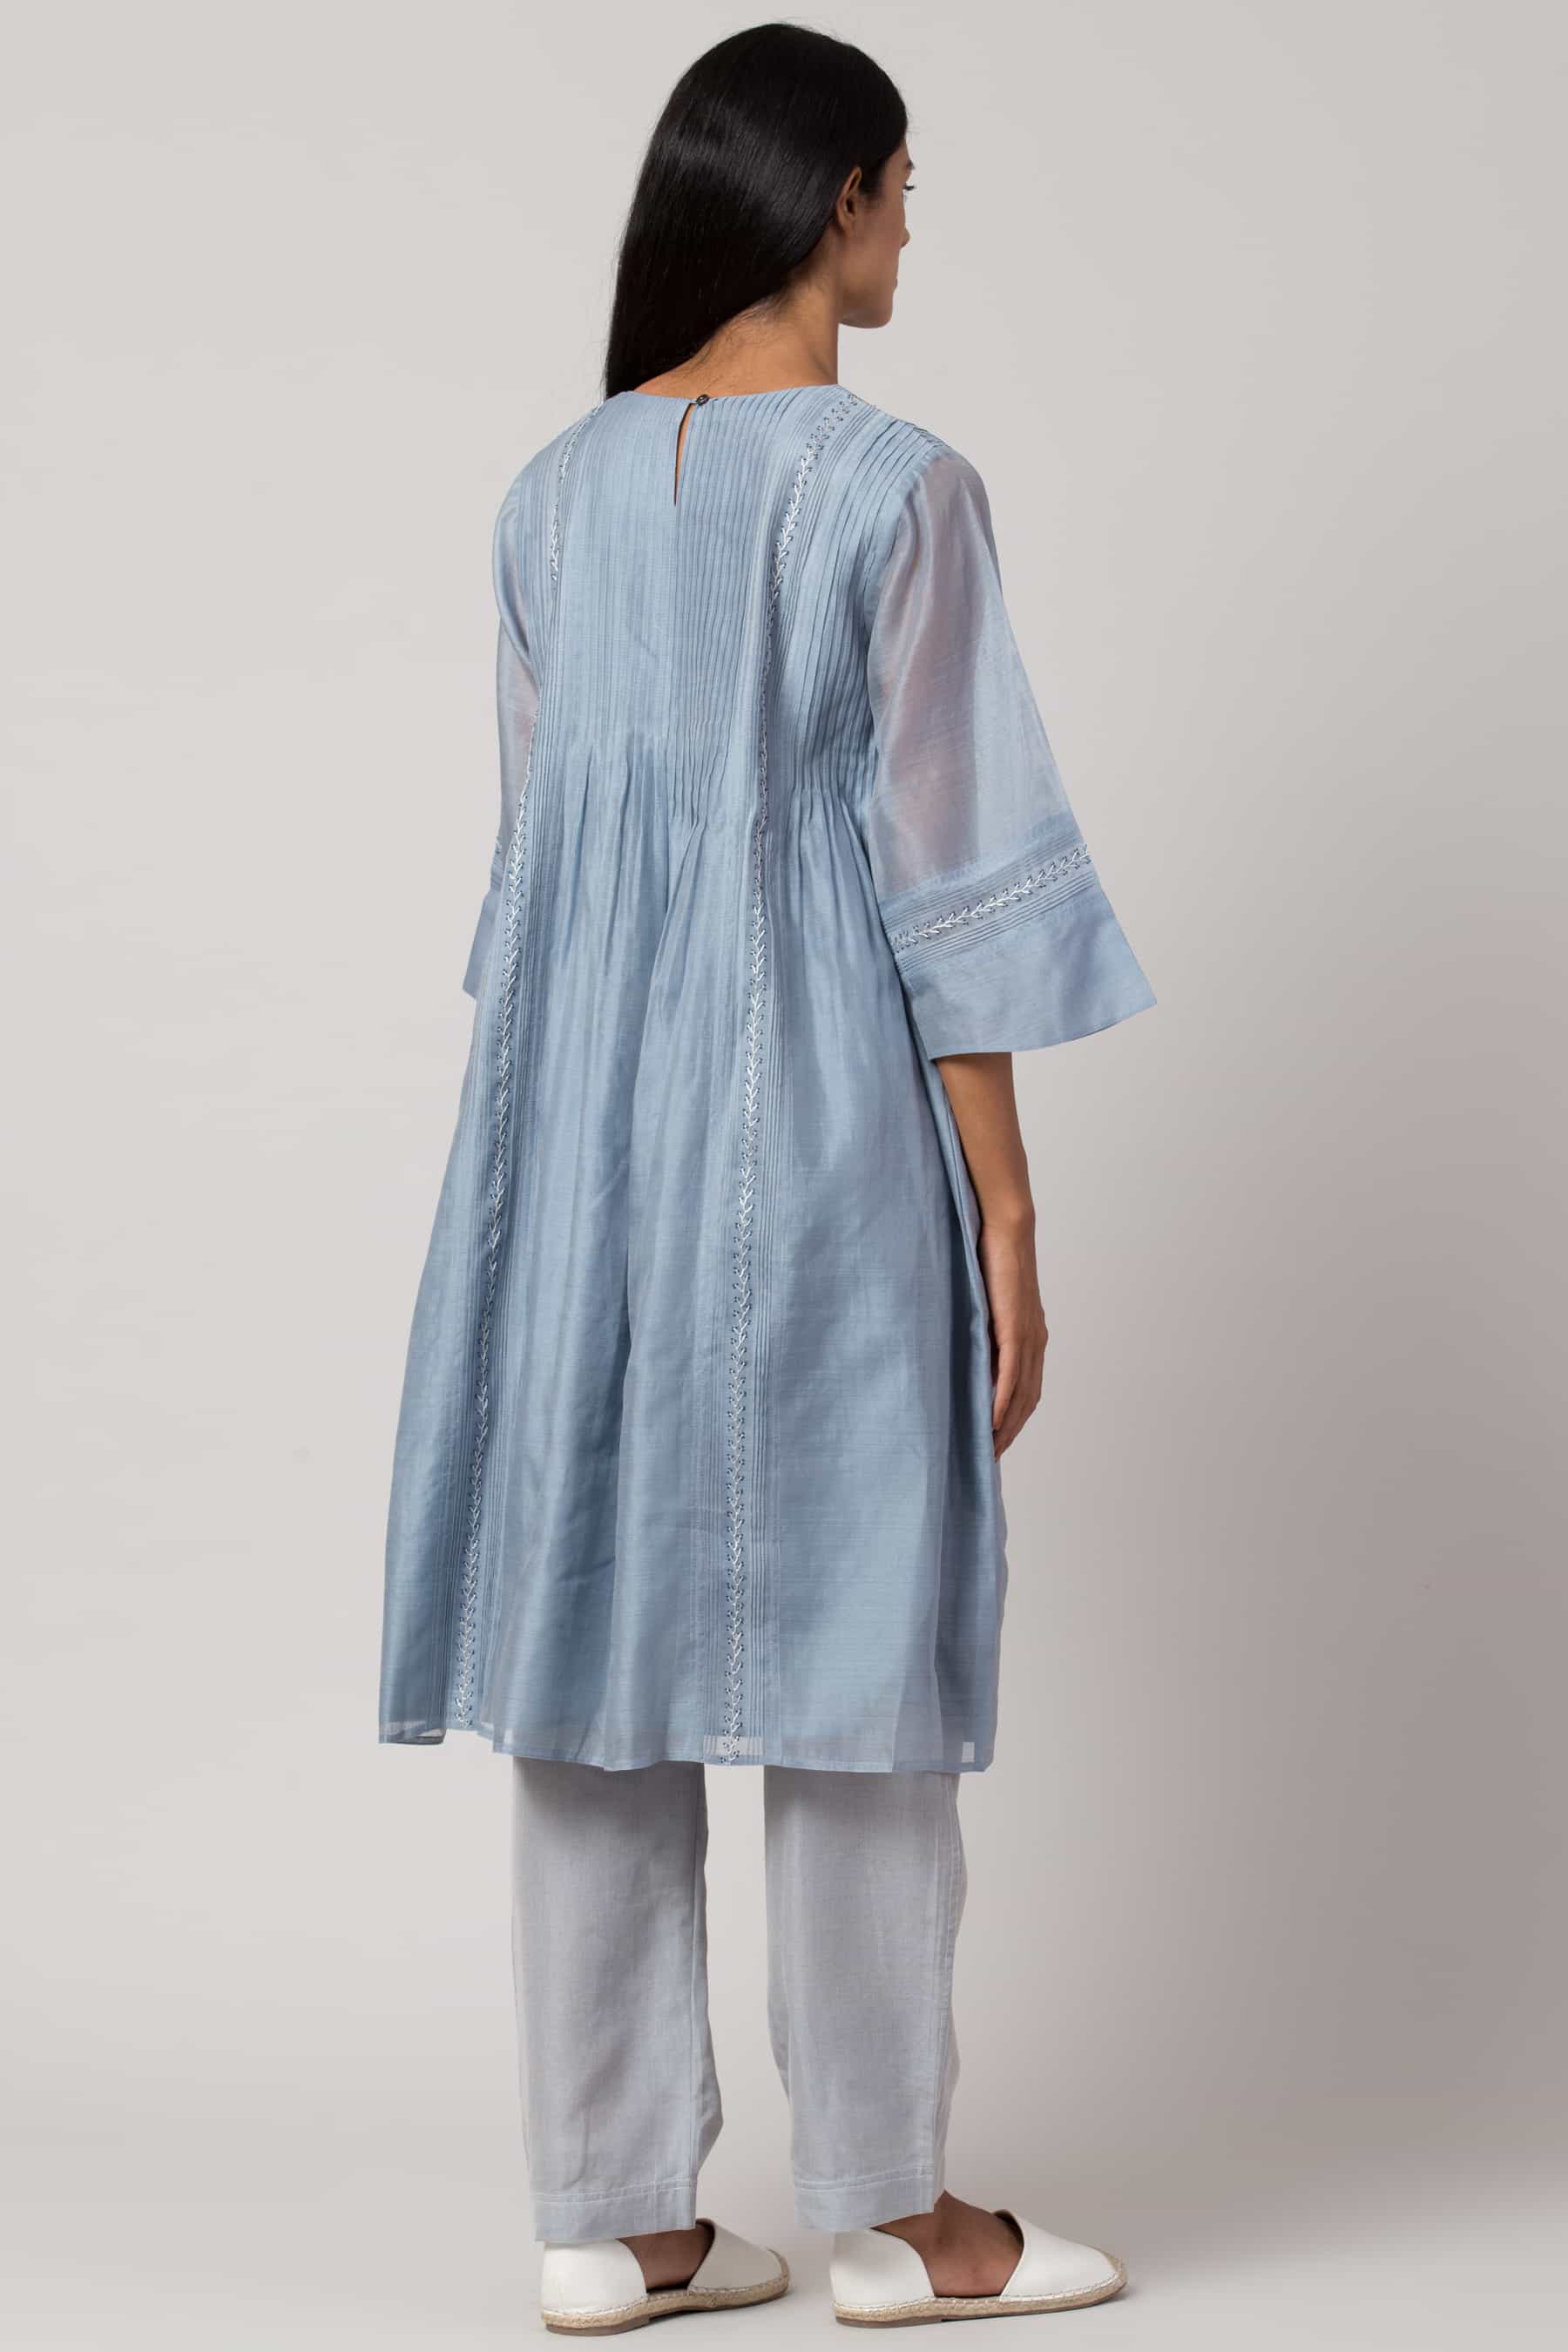 Blue hand-embroidered dress made in 100% handwoven yarn dyed silk Chanderi - back